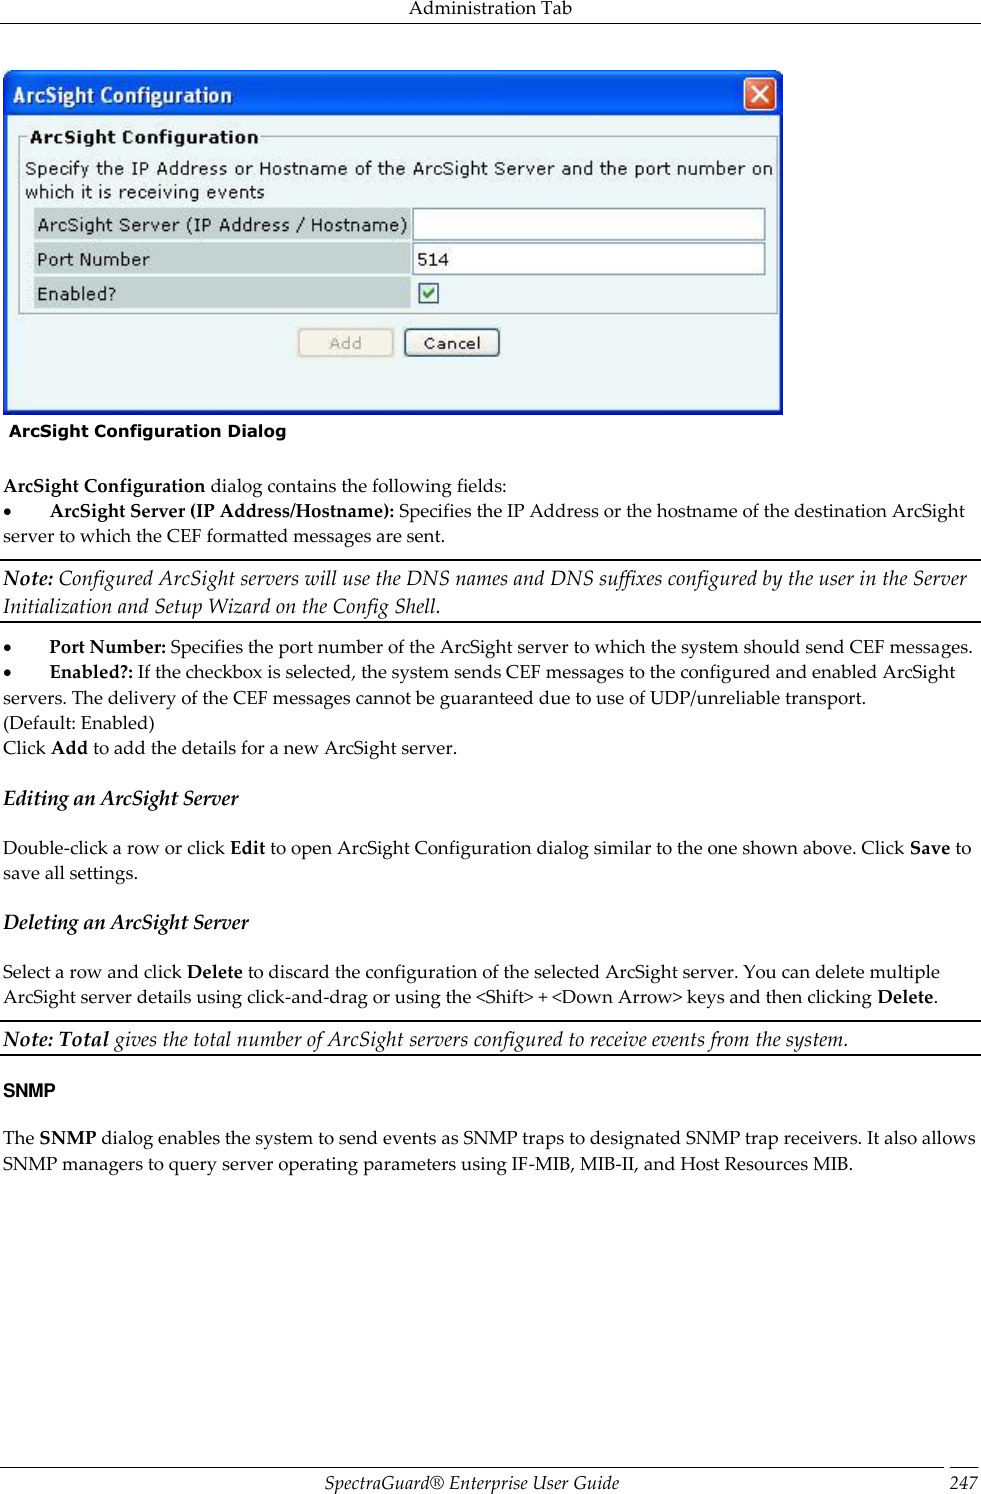 Administration Tab SpectraGuard®  Enterprise User Guide 247   ArcSight Configuration Dialog   ArcSight Configuration dialog contains the following fields:           ArcSight Server (IP Address/Hostname): Specifies the IP Address or the hostname of the destination ArcSight server to which the CEF formatted messages are sent. Note: Configured ArcSight servers will use the DNS names and DNS suffixes configured by the user in the Server Initialization and Setup Wizard on the Config Shell.           Port Number: Specifies the port number of the ArcSight server to which the system should send CEF messages.           Enabled?: If the checkbox is selected, the system sends CEF messages to the configured and enabled ArcSight servers. The delivery of the CEF messages cannot be guaranteed due to use of UDP/unreliable transport. (Default: Enabled) Click Add to add the details for a new ArcSight server. Editing an ArcSight Server Double-click a row or click Edit to open ArcSight Configuration dialog similar to the one shown above. Click Save to save all settings. Deleting an ArcSight Server Select a row and click Delete to discard the configuration of the selected ArcSight server. You can delete multiple ArcSight server details using click-and-drag or using the &lt;Shift&gt; + &lt;Down Arrow&gt; keys and then clicking Delete. Note: Total gives the total number of ArcSight servers configured to receive events from the system. SNMP The SNMP dialog enables the system to send events as SNMP traps to designated SNMP trap receivers. It also allows SNMP managers to query server operating parameters using IF-MIB, MIB-II, and Host Resources MIB. 